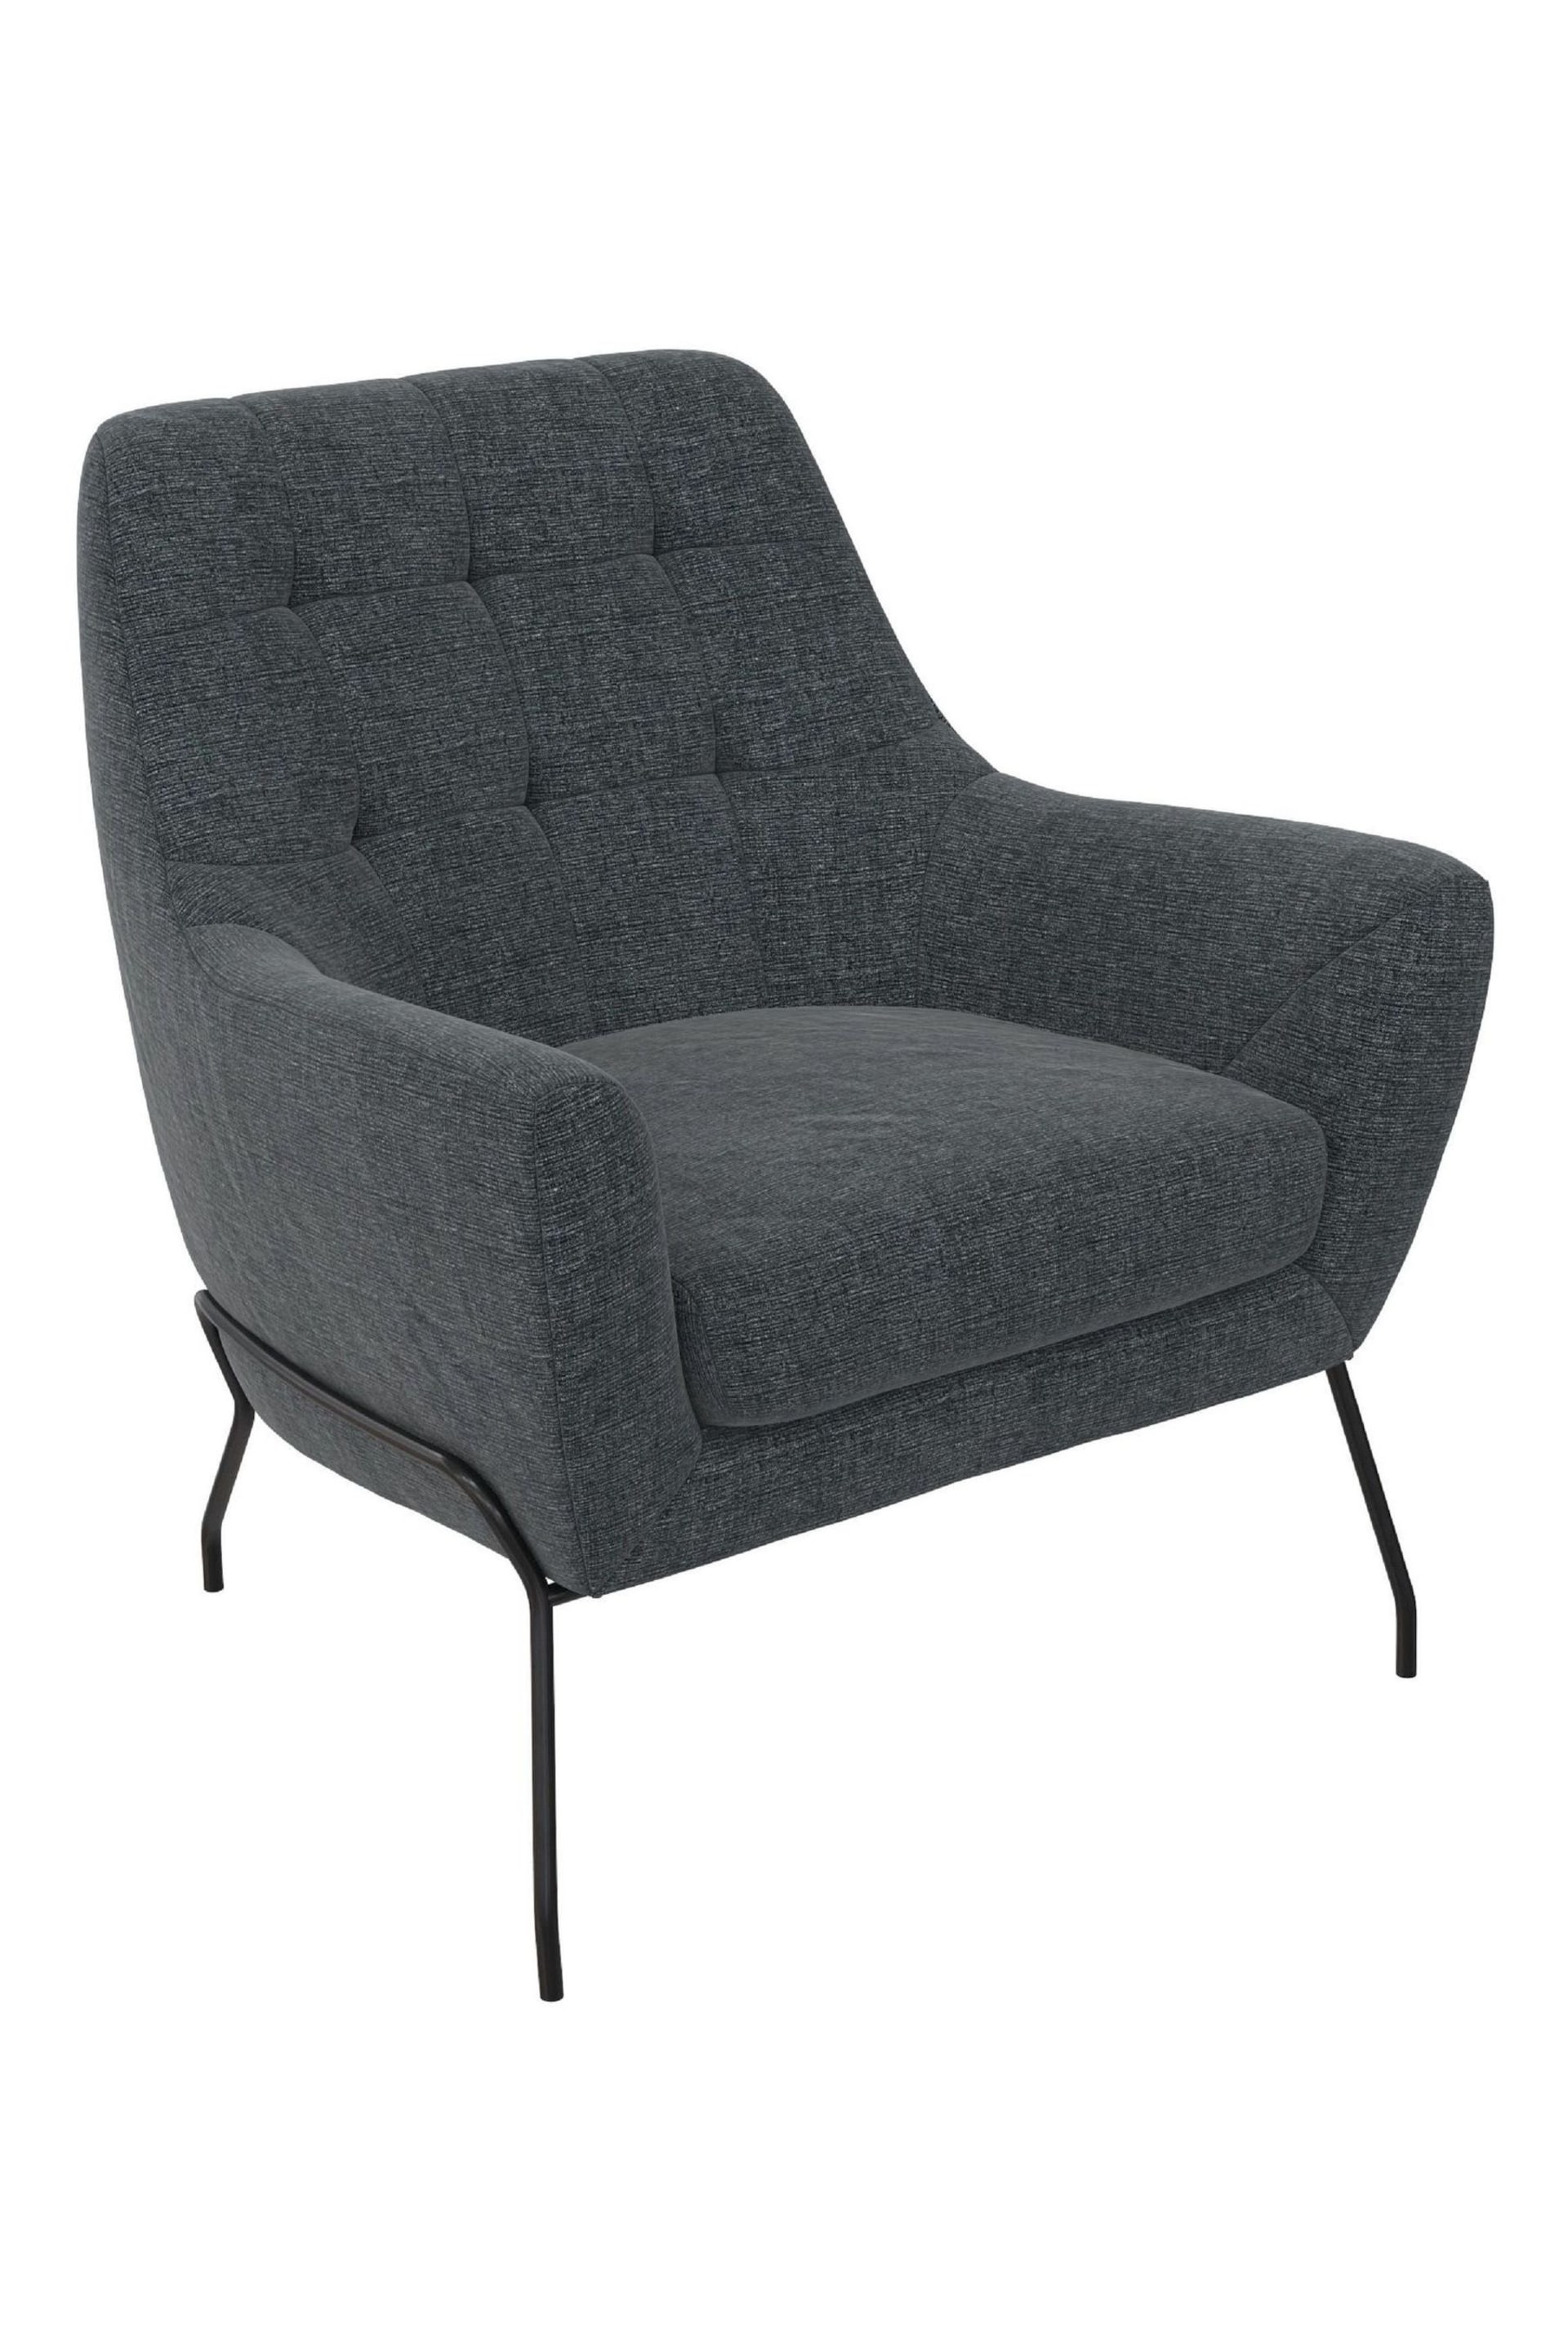 Dorel Home Grey Europe Brayden Accent Upholstered Chair - Image 3 of 4